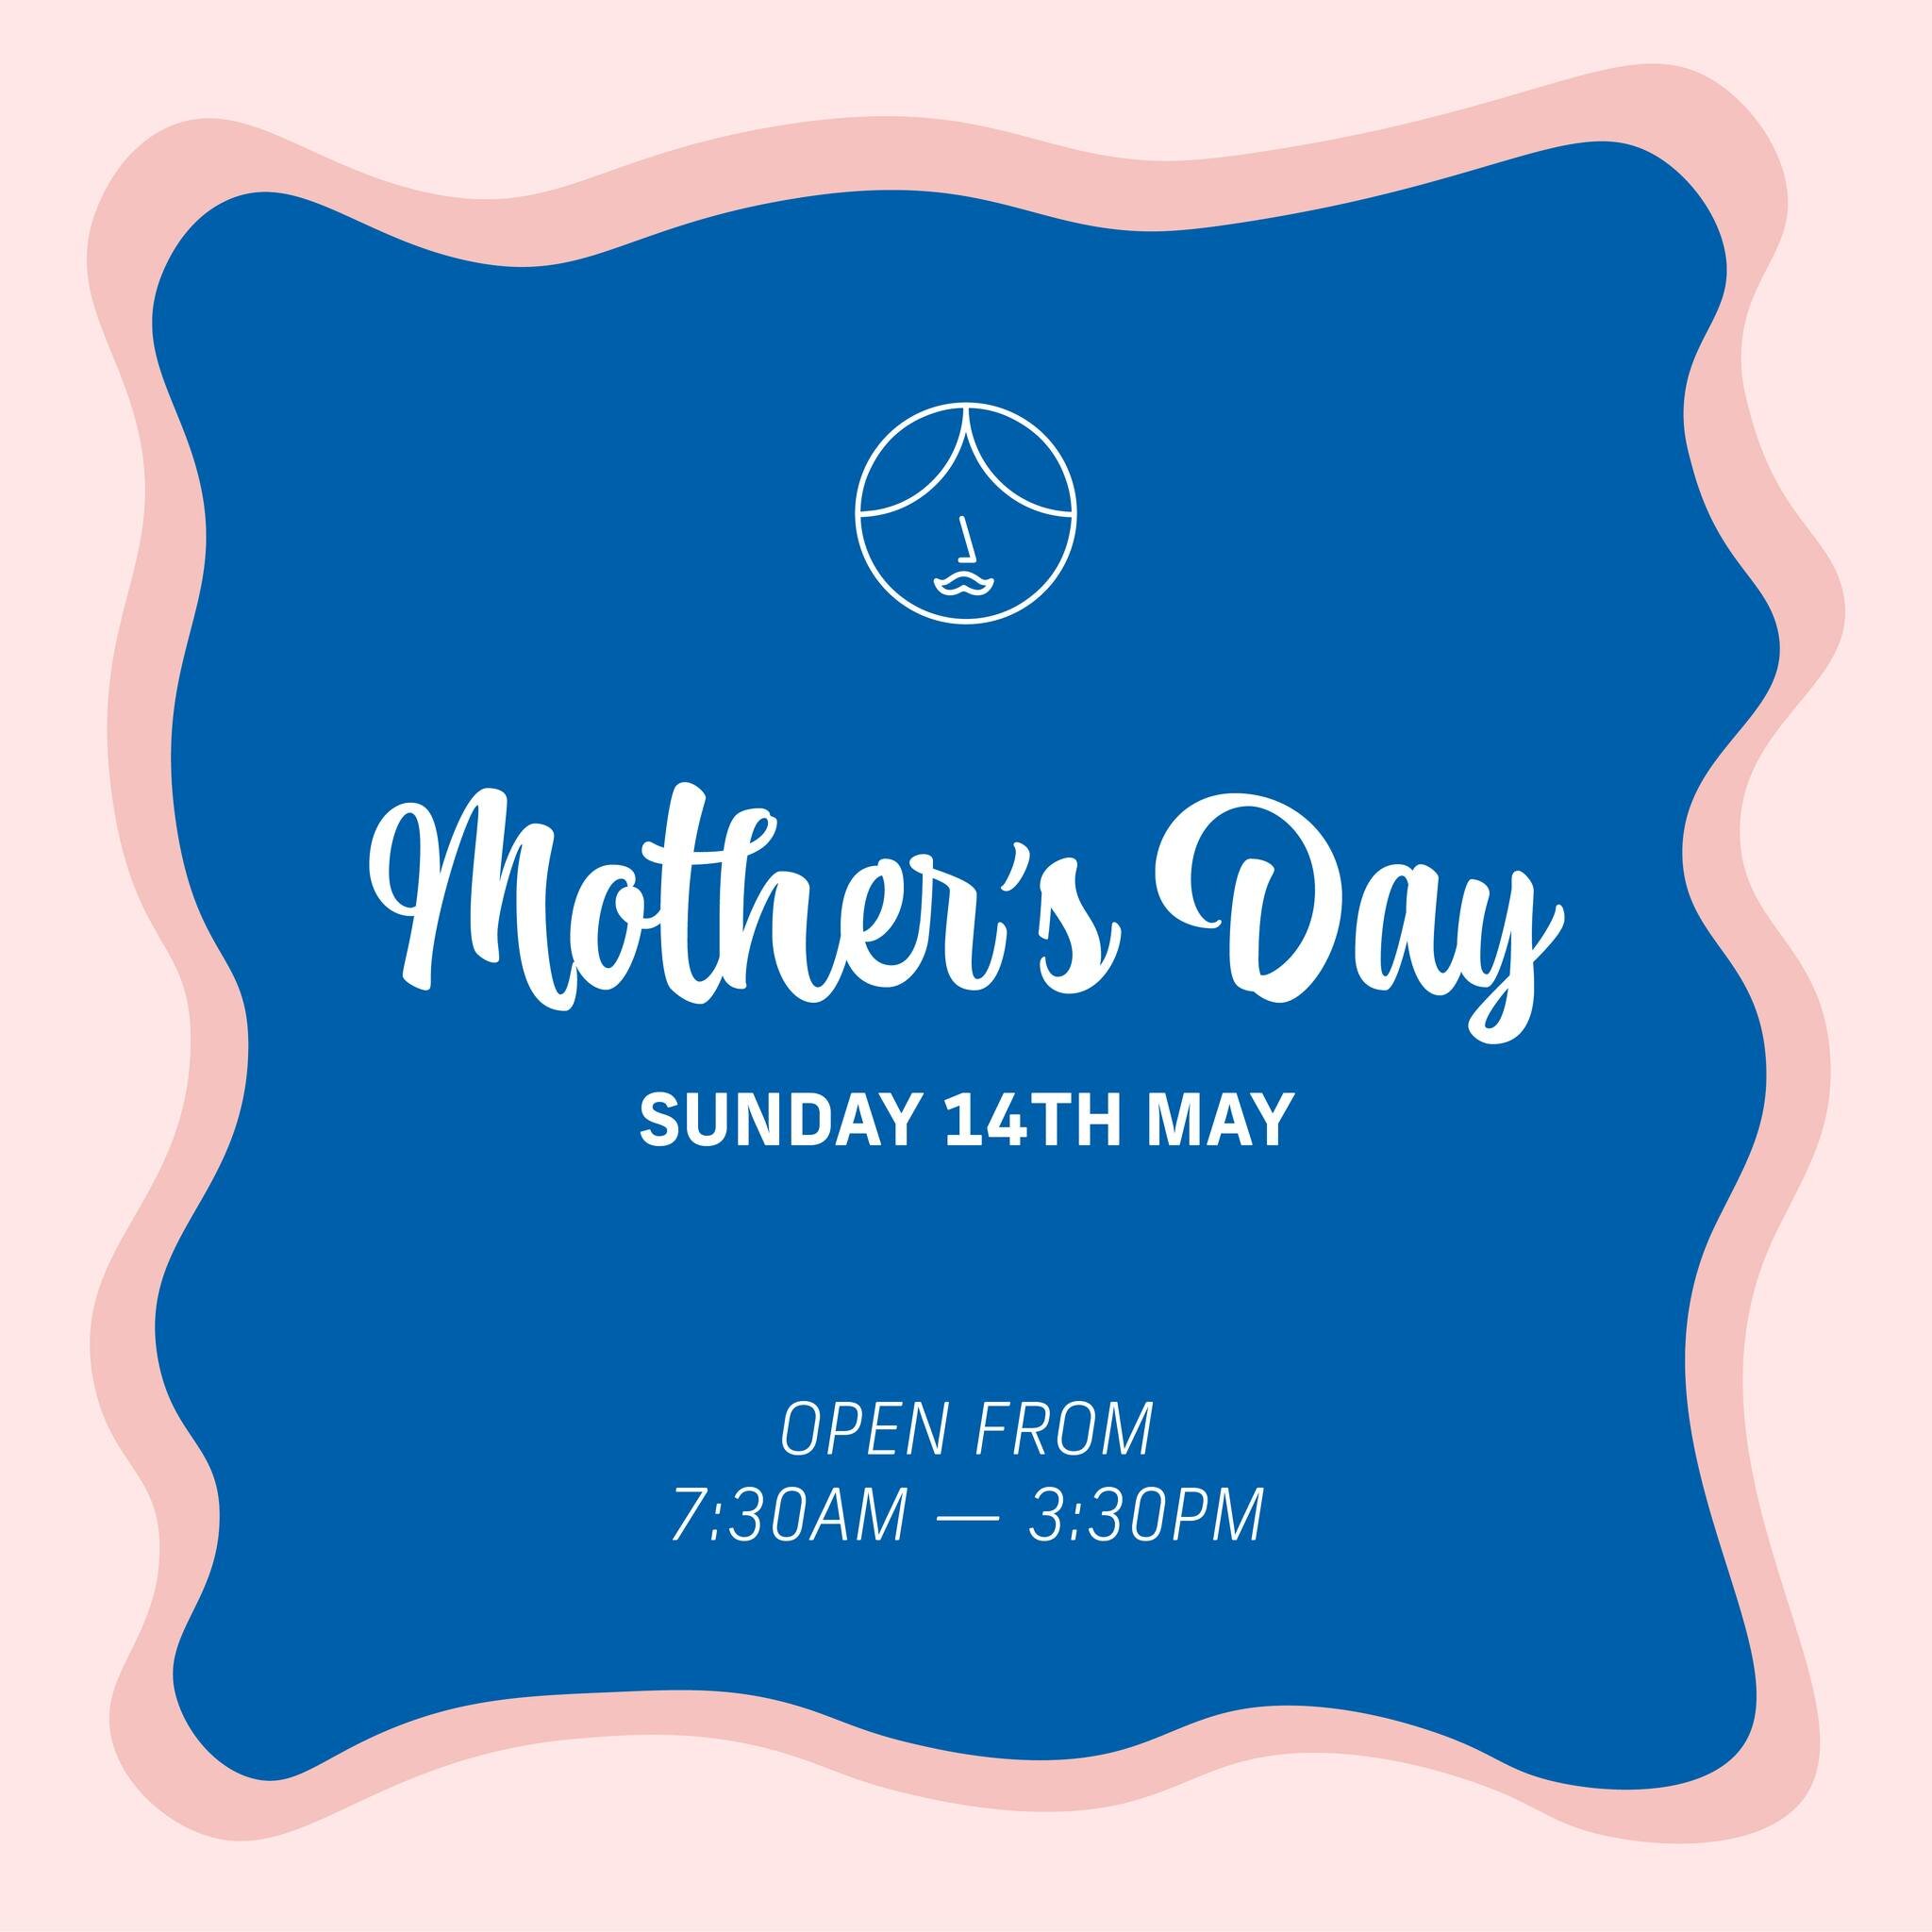 There's still time to make a booking for breakfast, brunch or lunch with mum this Mother's Day 💖

Give us a call or email to book your spot!

🖥 mrsistercafe@icloud.com
📞 03 9572 4420

#mrsistercafe #mothersdaybookings #happymothersday #malverneast